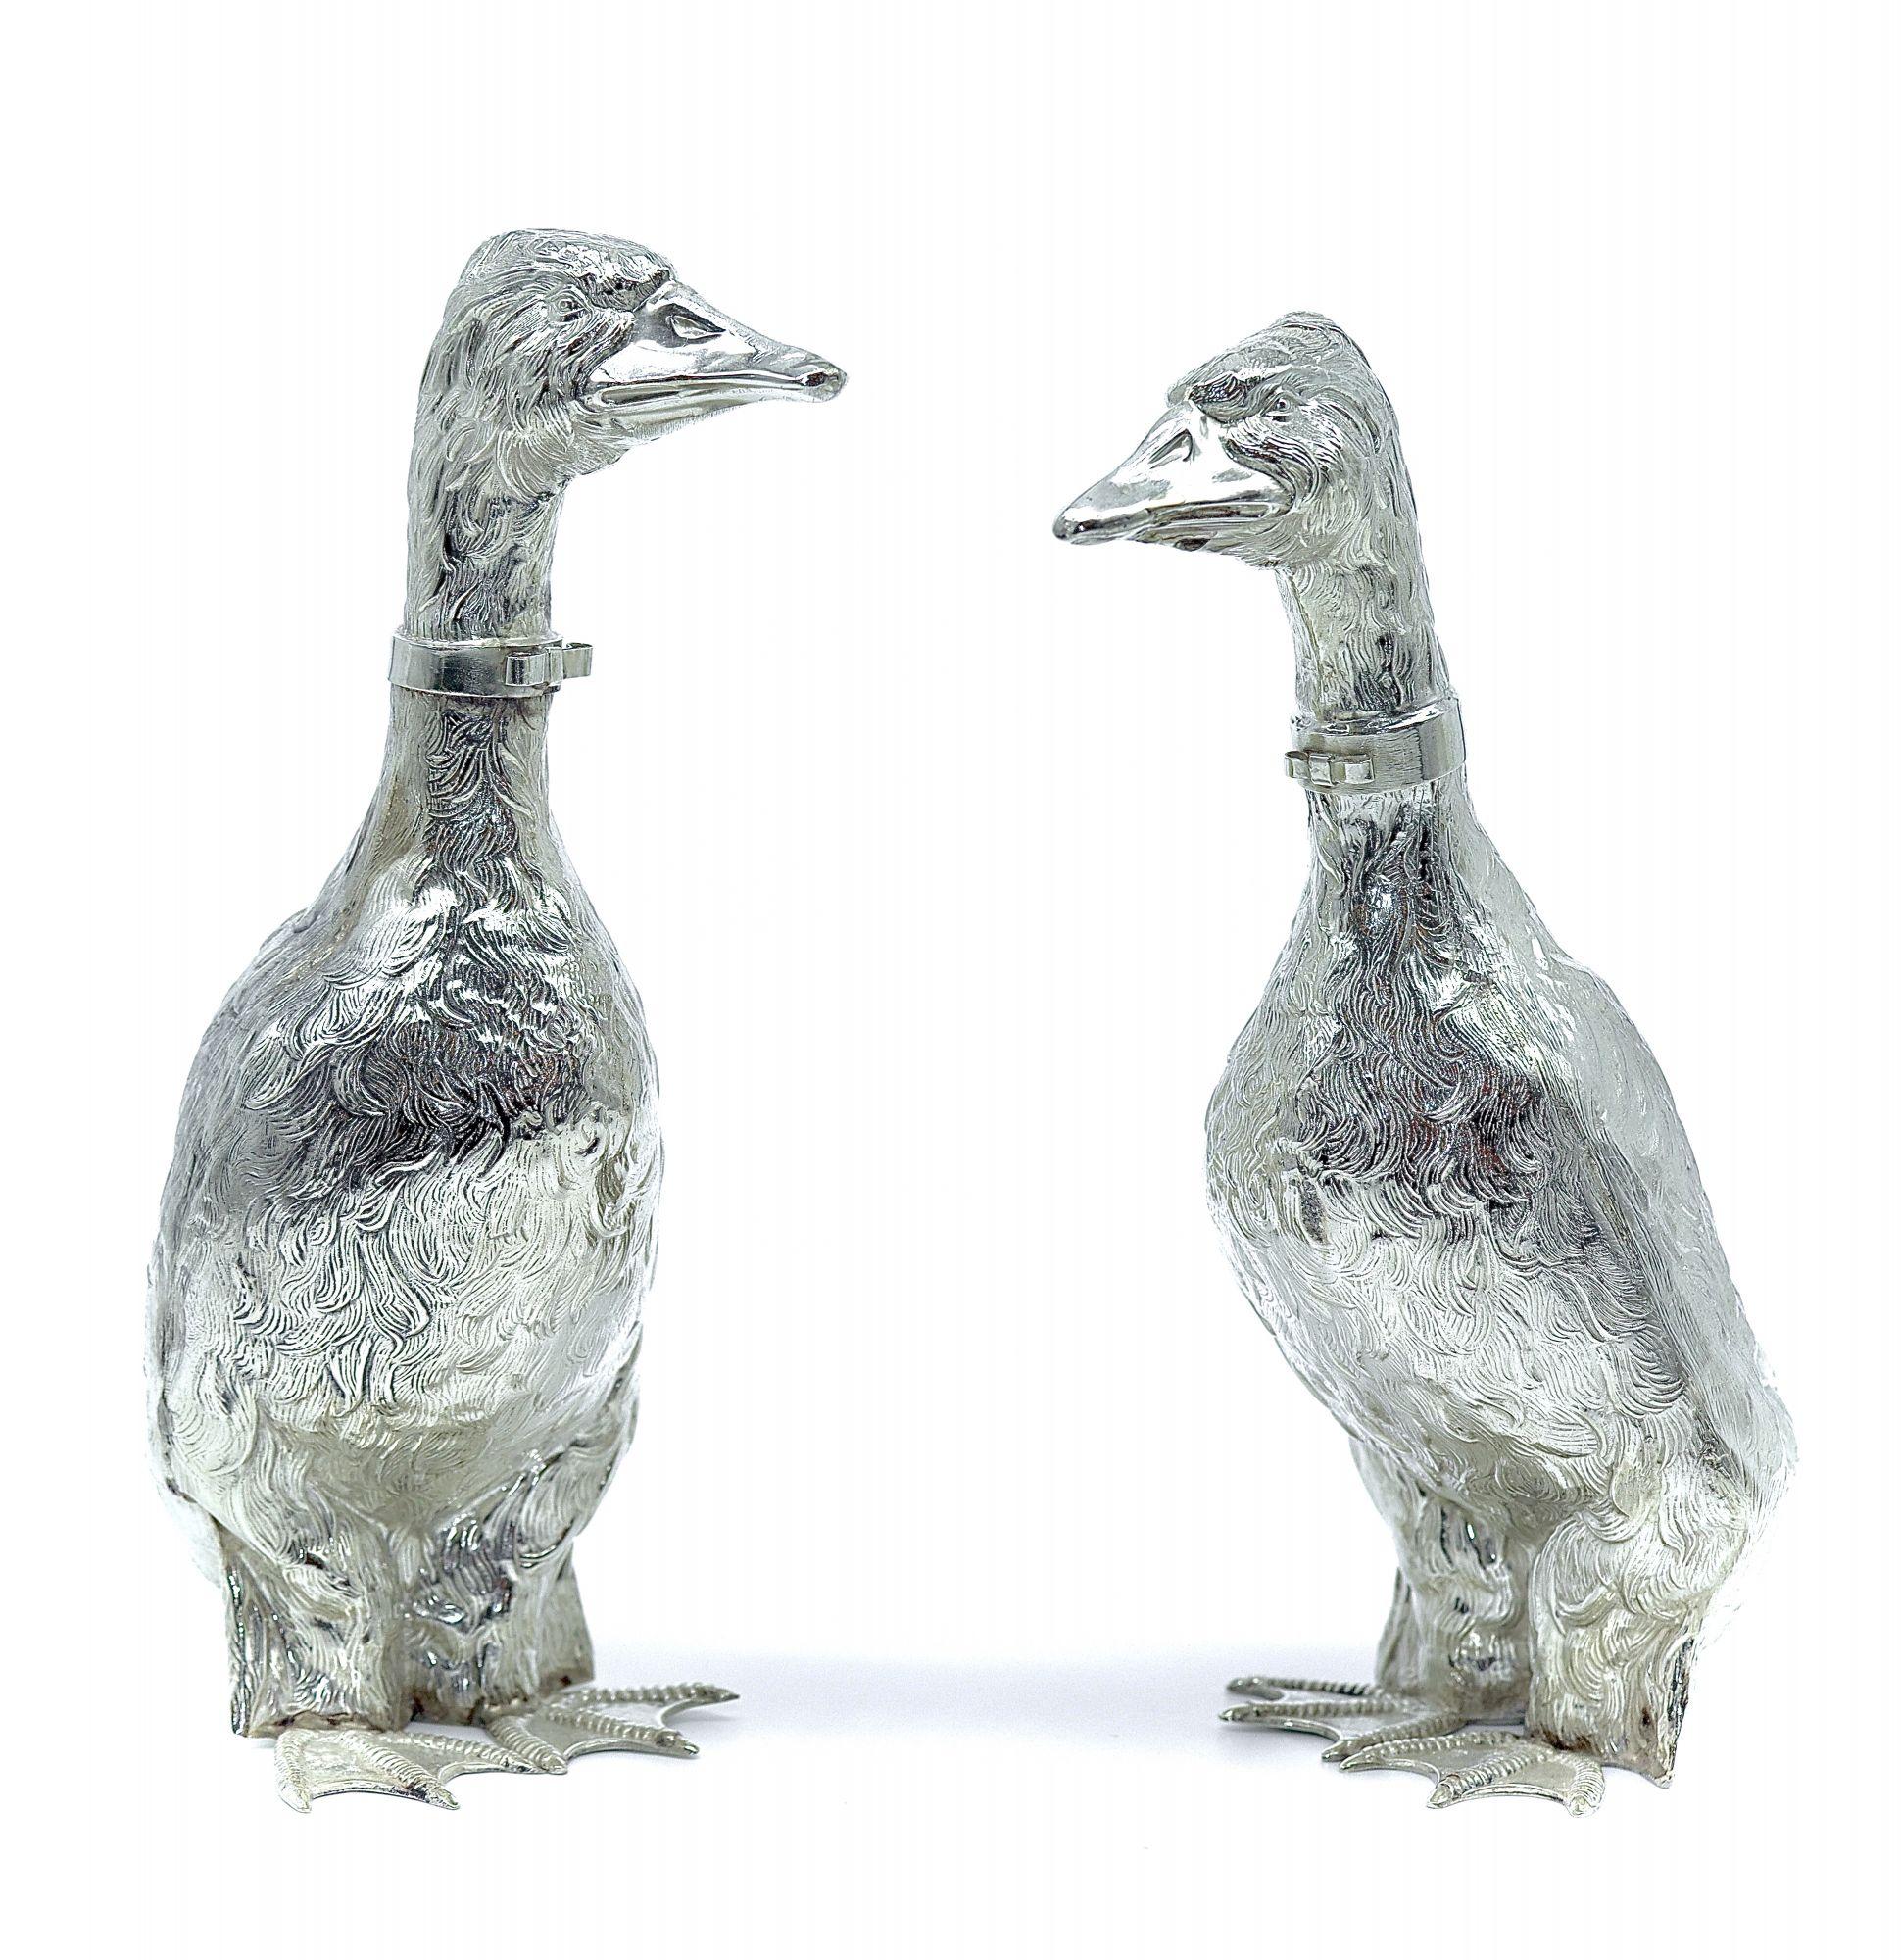 This beautifully executed pair of decanters were modeled after ducks, they added a whimsical twist by adding a bow tie around their necks. These were made for the American market during the prohibition era as the liquor they would be filled with